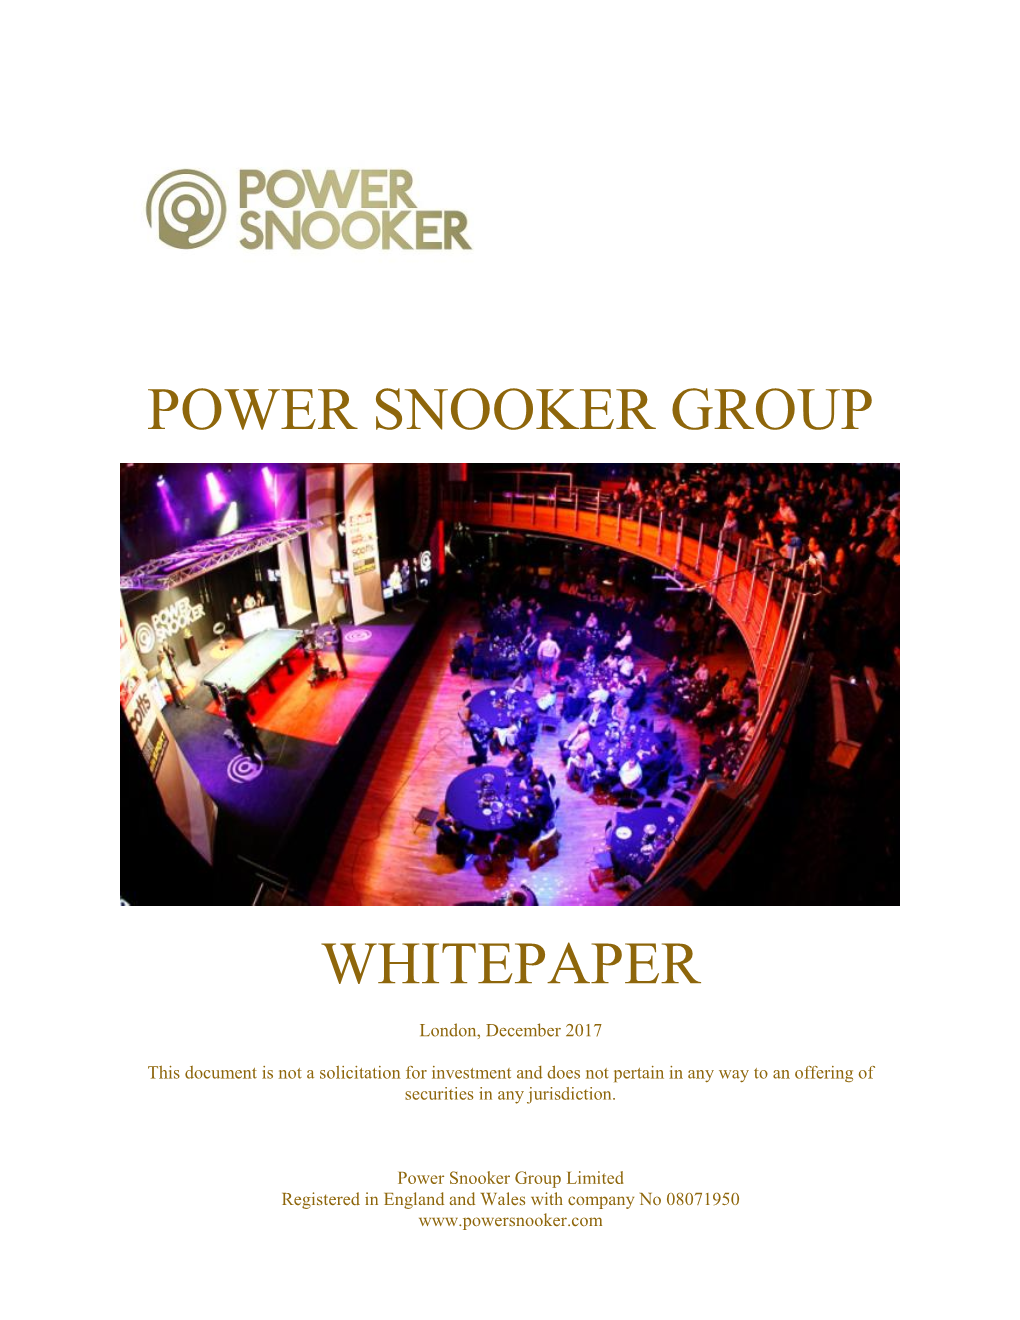 Power Snooker Group